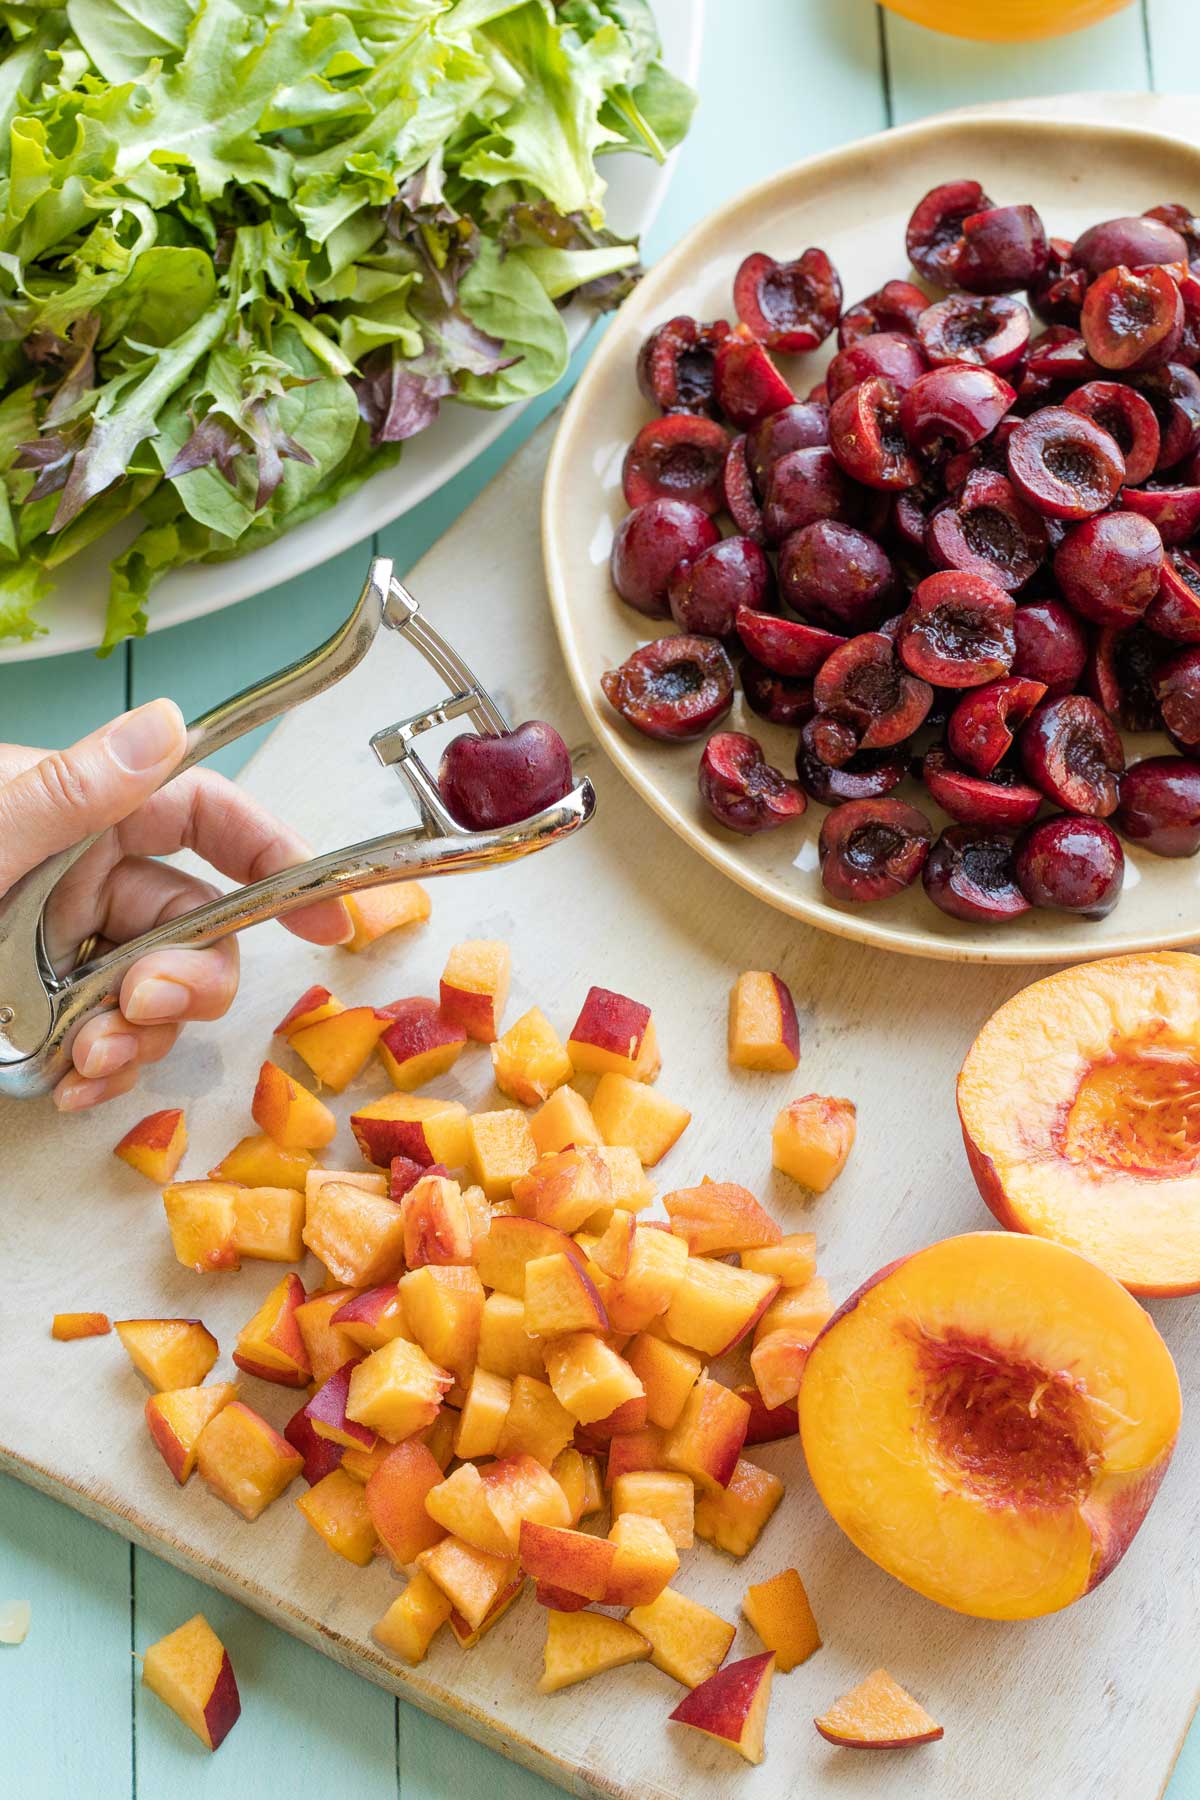 Peaches being cut into cubes on white cutting board with one peach halved, and plate of halved cherries with hand using cherry pitter.